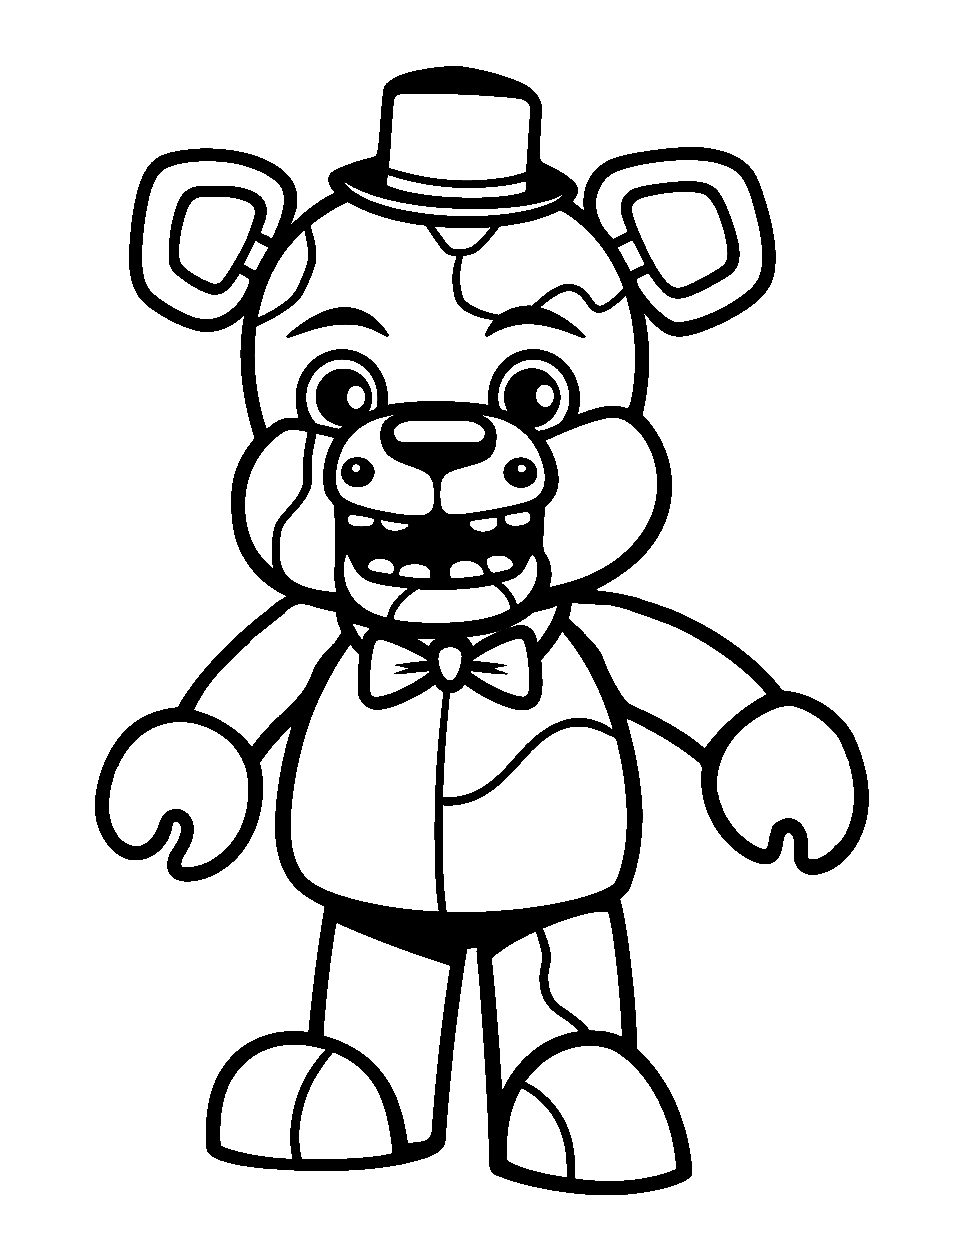 25 Five Nights At Freddy's Coloring Pages: Free Printables